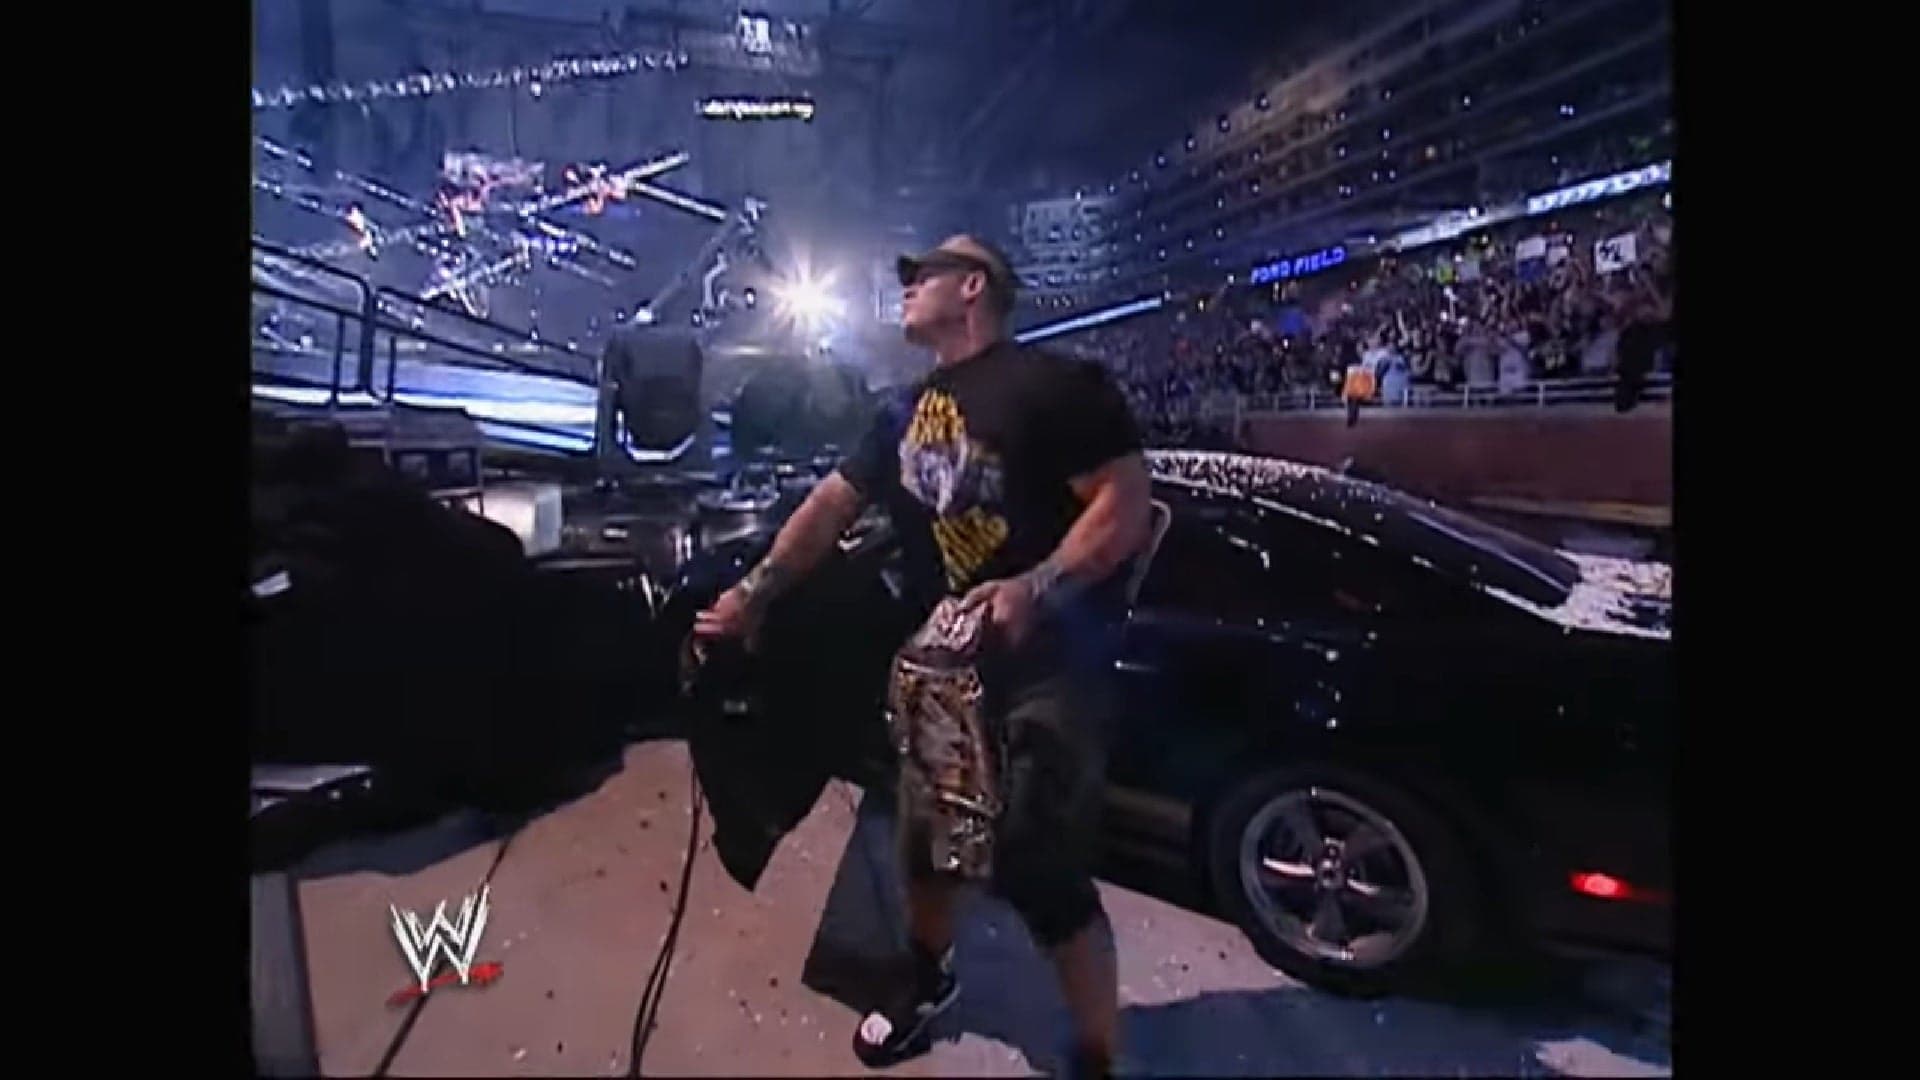 April Fools Day When We Remember John Cena Drove a Ford Mustang Through Glass in Detroit